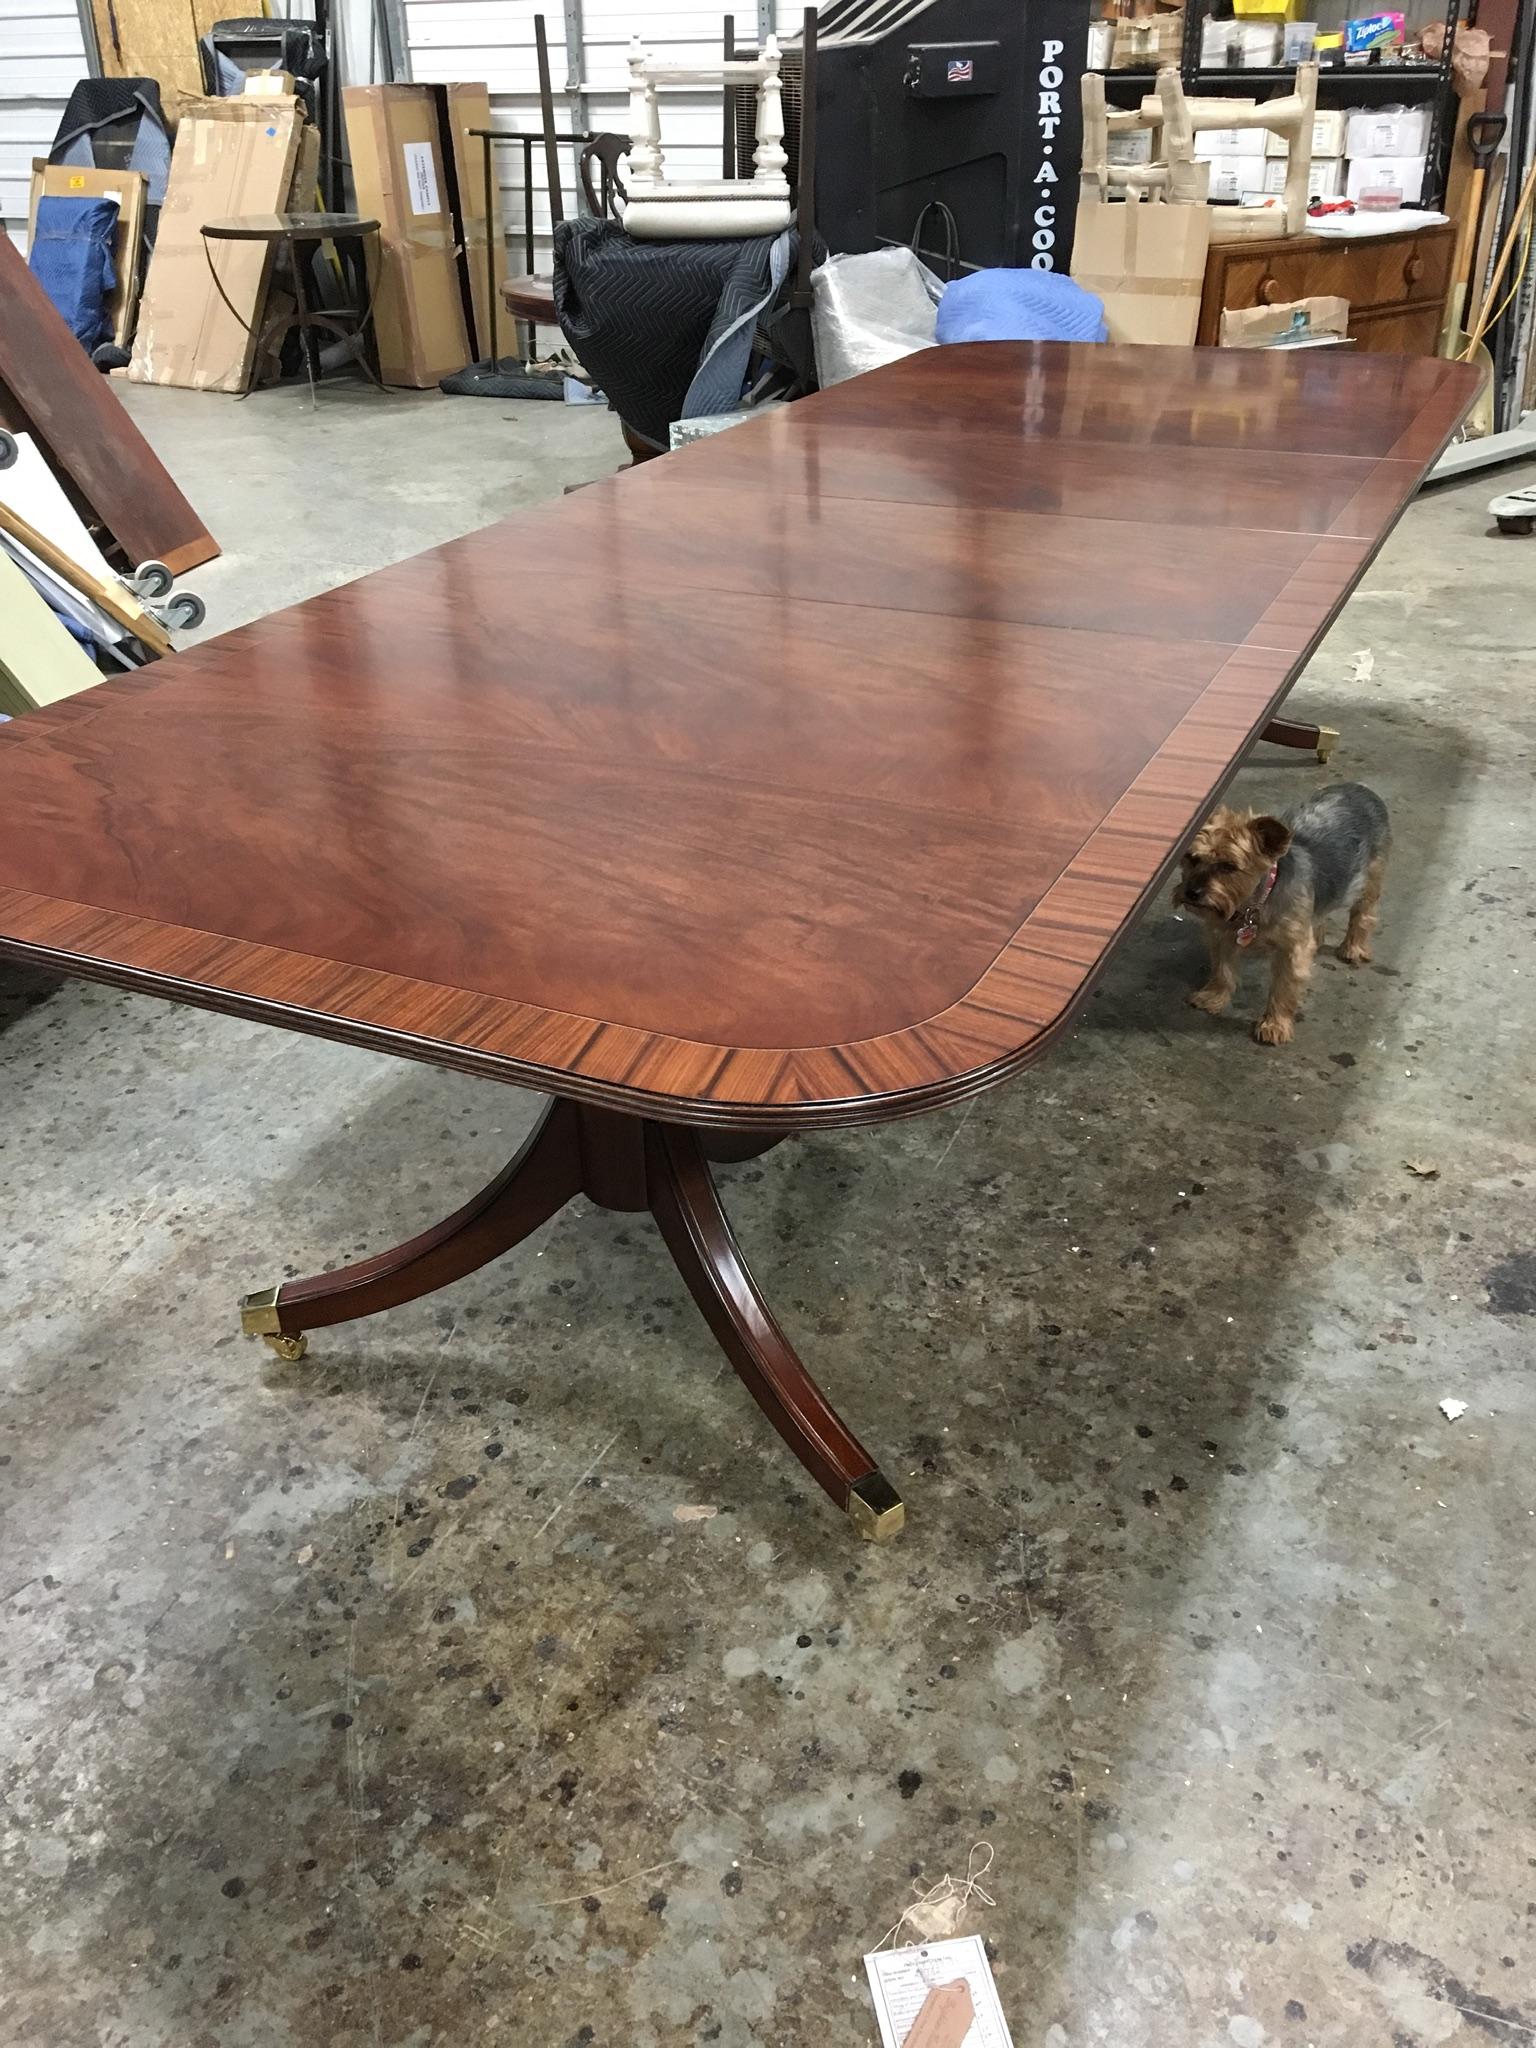 This is a made-to-order Traditional mahogany dining table made in the Leighton Hall shop. It features a field of slip-matched swirly crotch mahogany from west Africa and a Santos rosewood border from South America. It has a matte finish. The